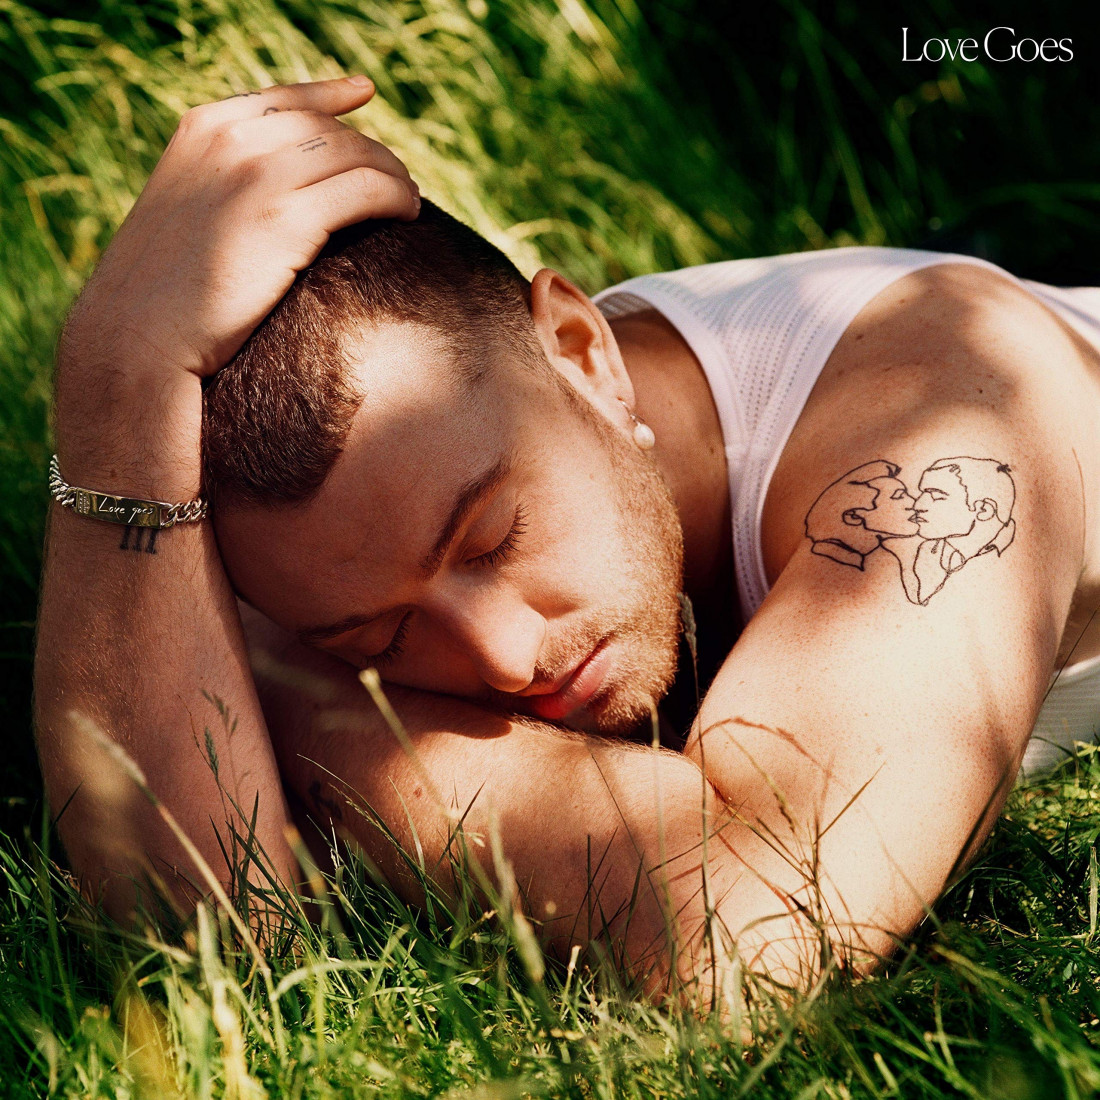 [Sam Smith] To Die For (Love Goes-2020) Photo-Image